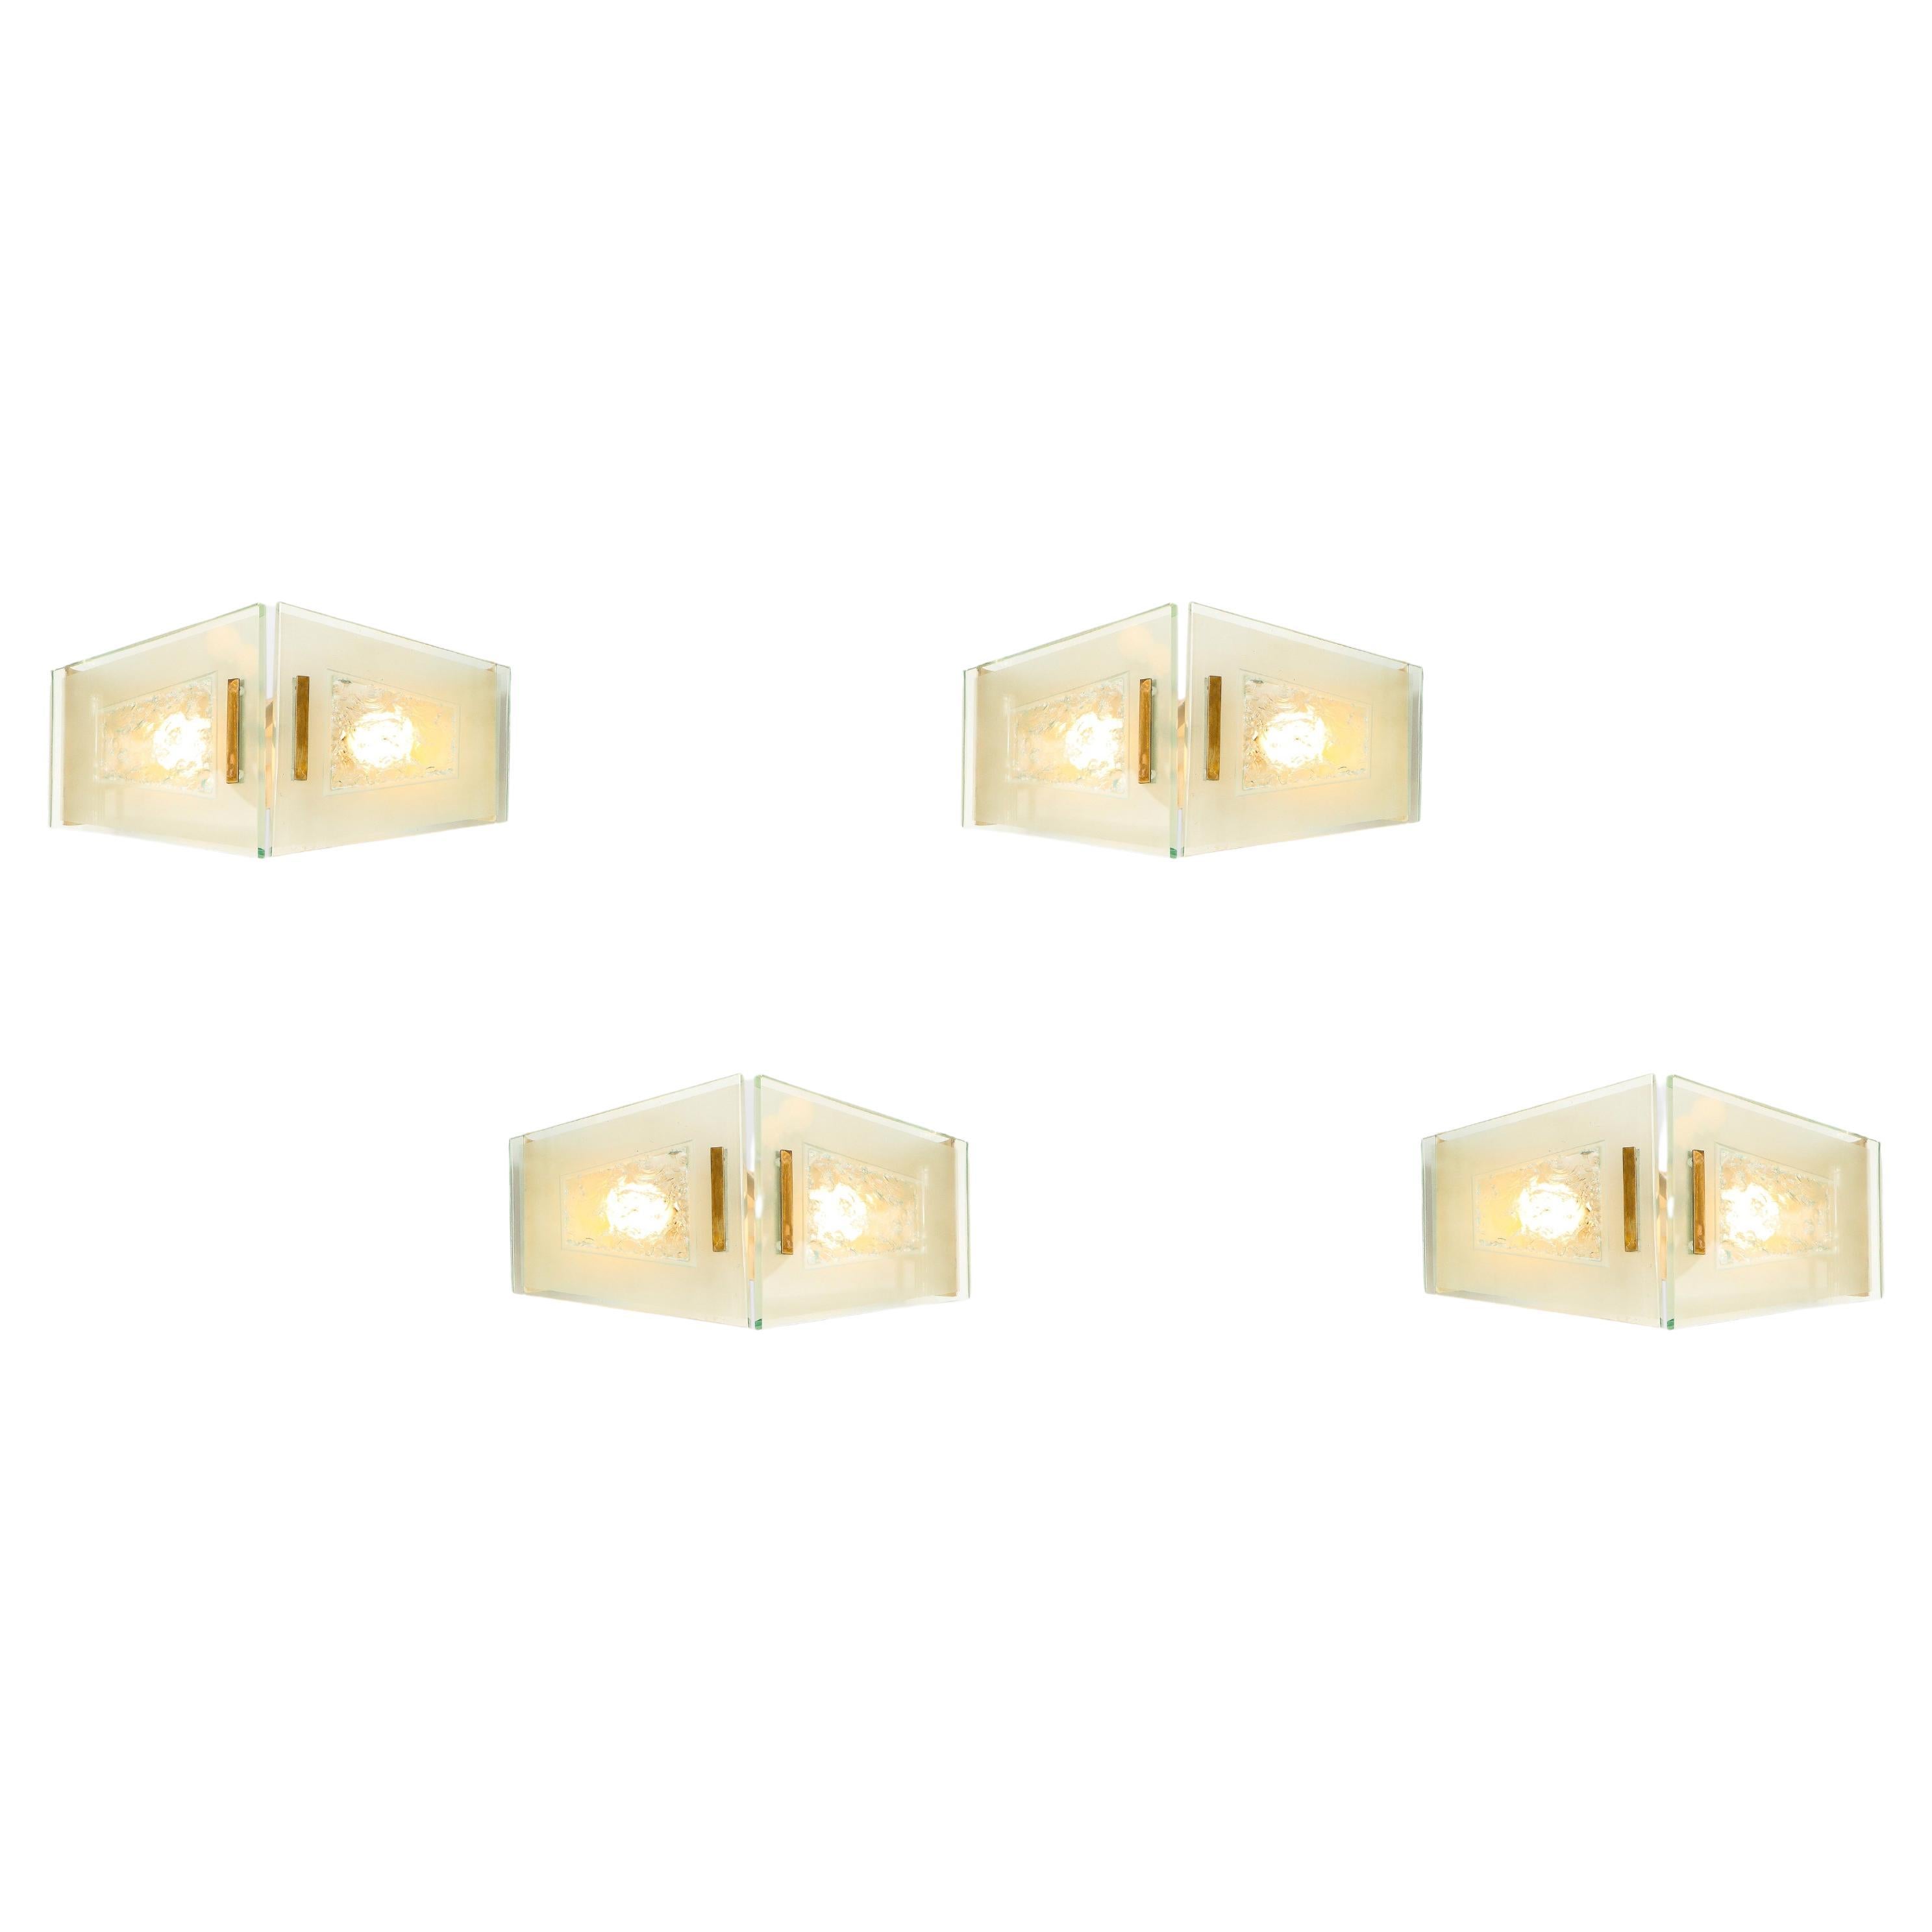 Max Ingrand Rare Pairs of Sconces Model 2373  For Sale